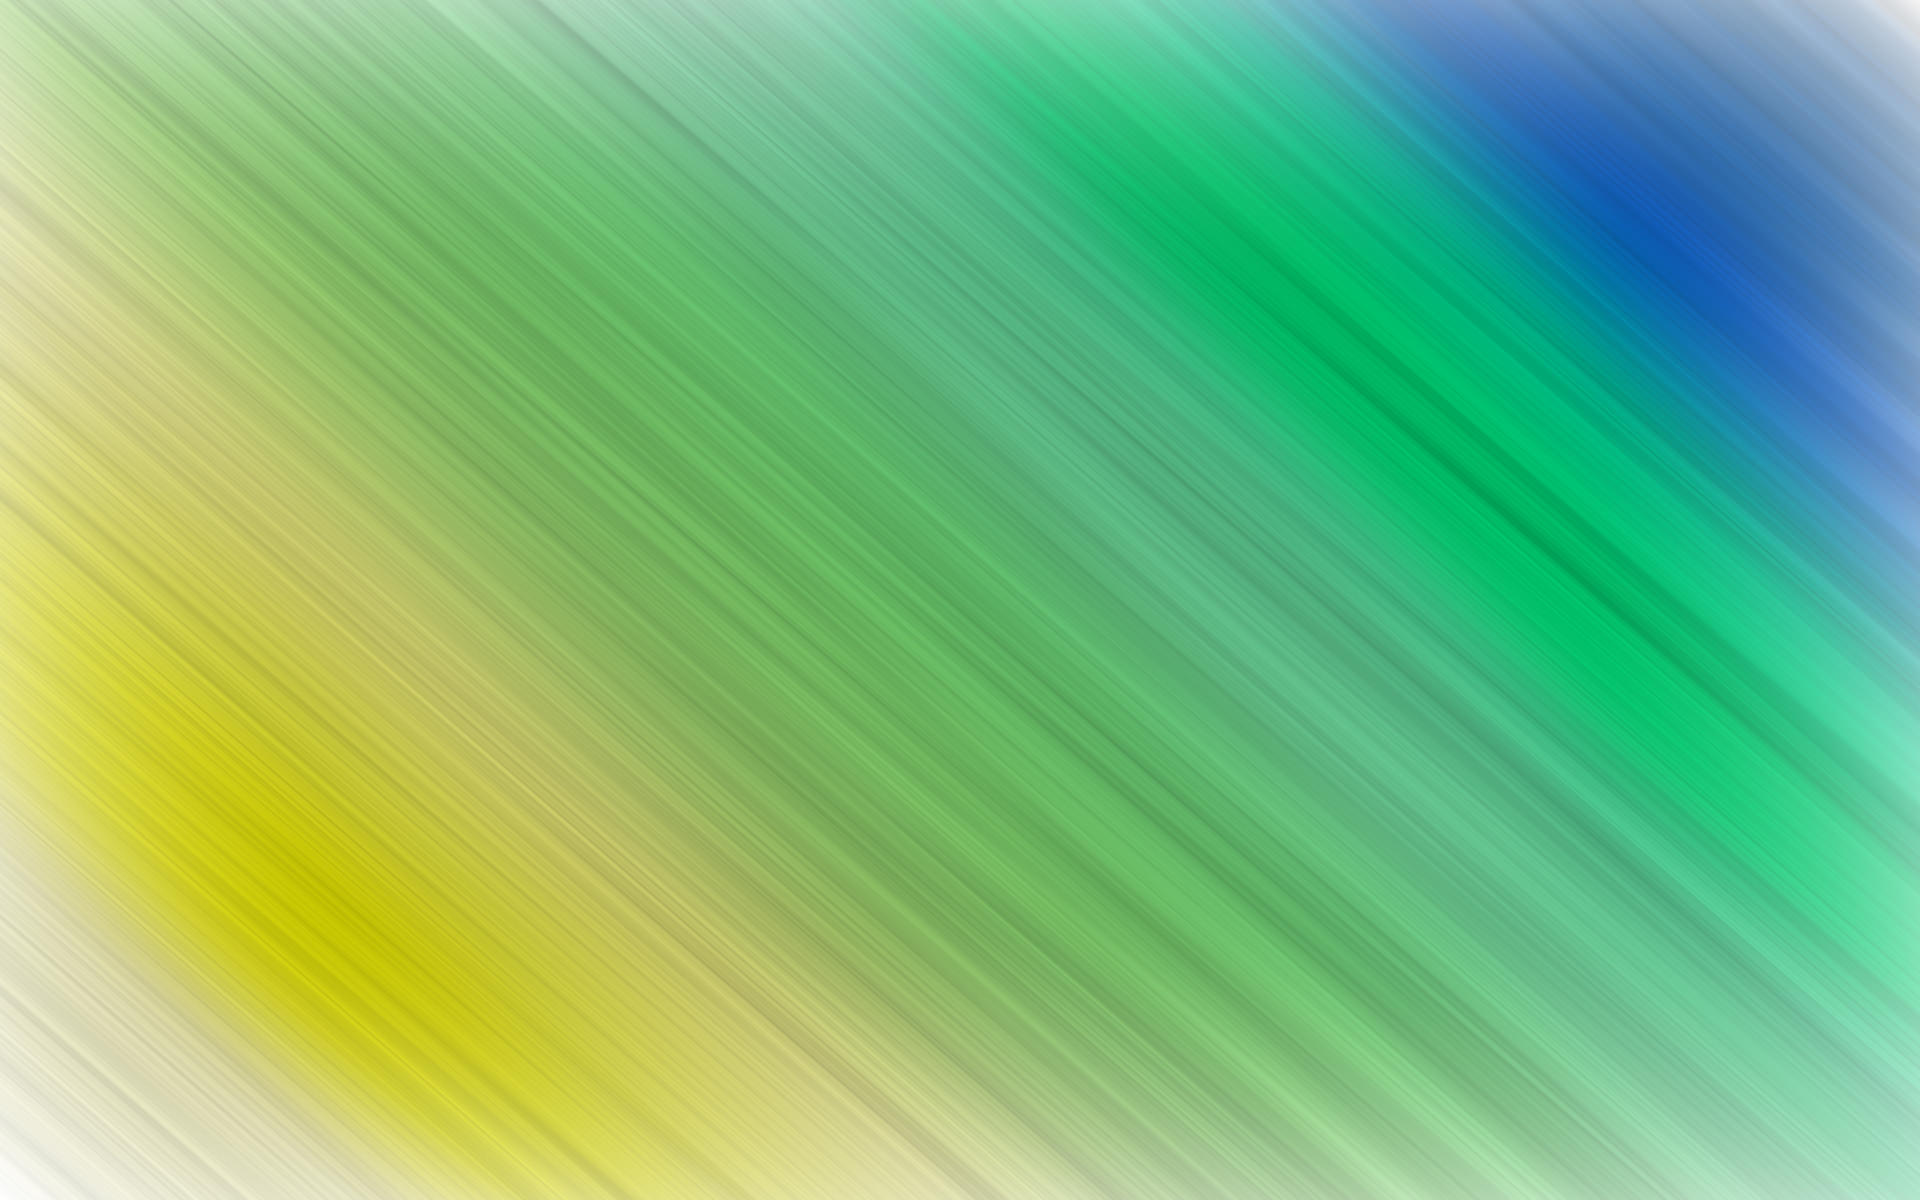 Colored Diagonal Lines Texture Background